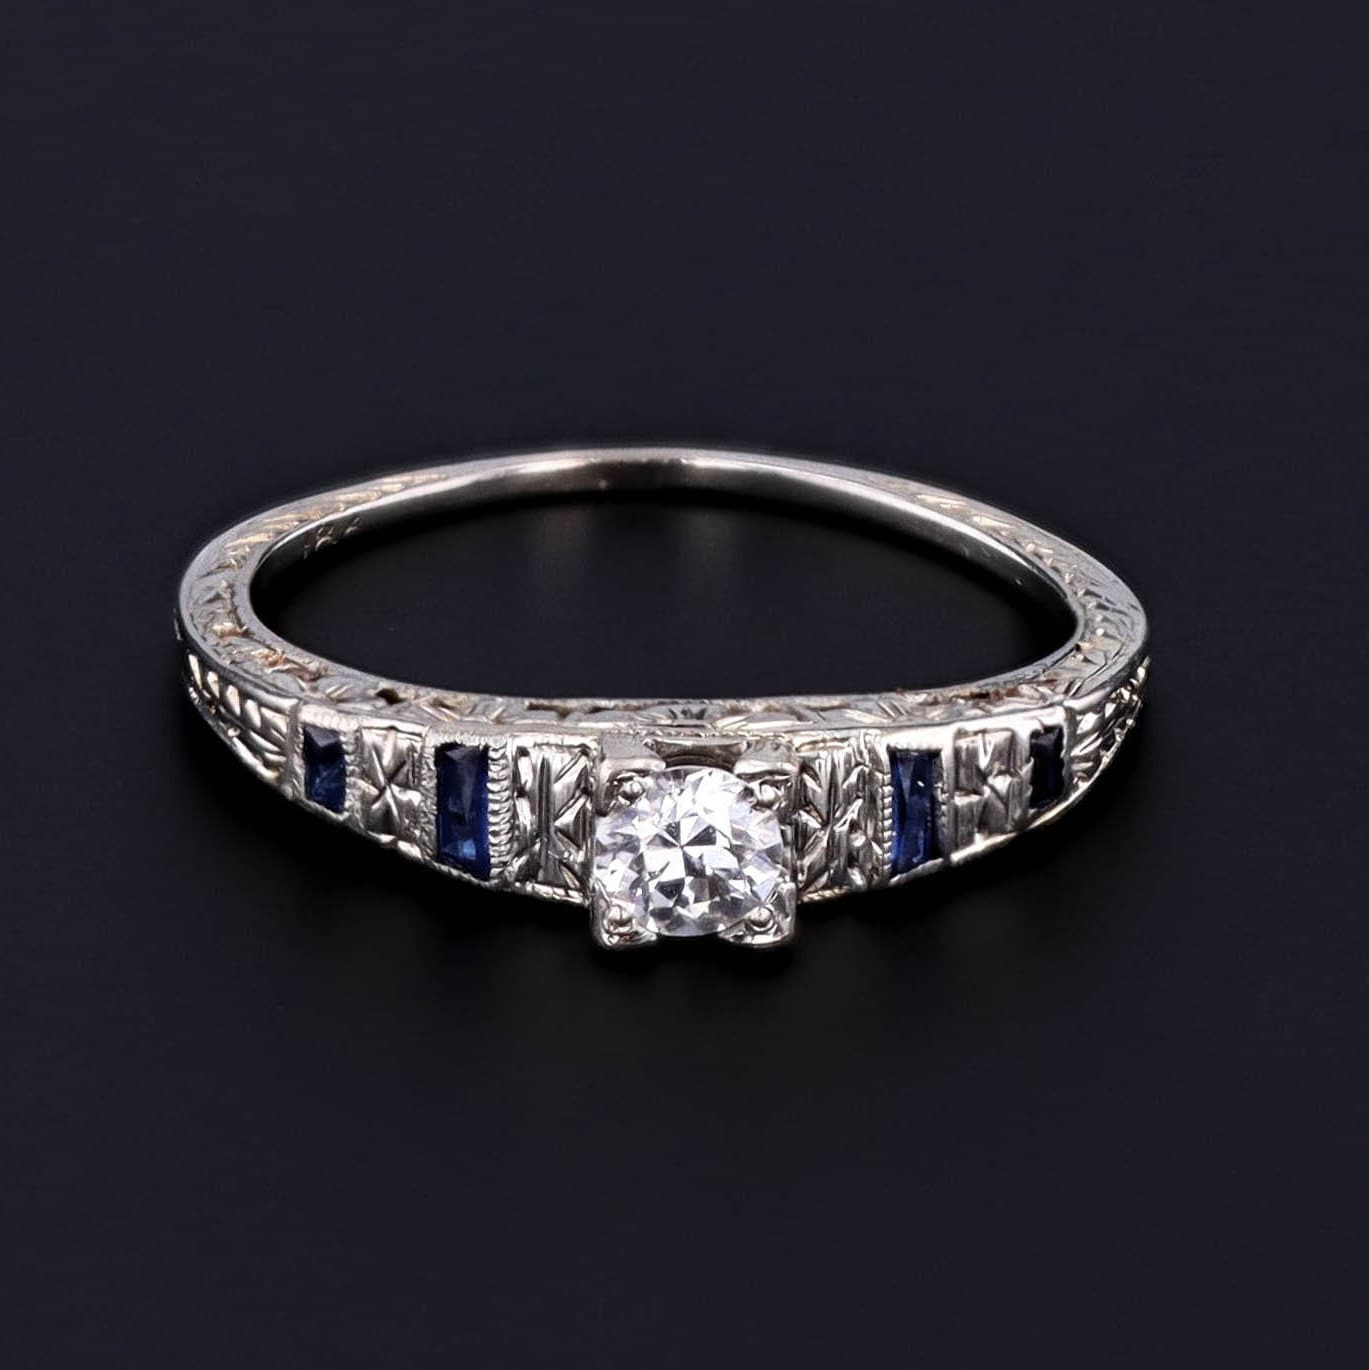 Vintage Diamond and Synthetic Sapphire Engagement Ring of 18k White Gold